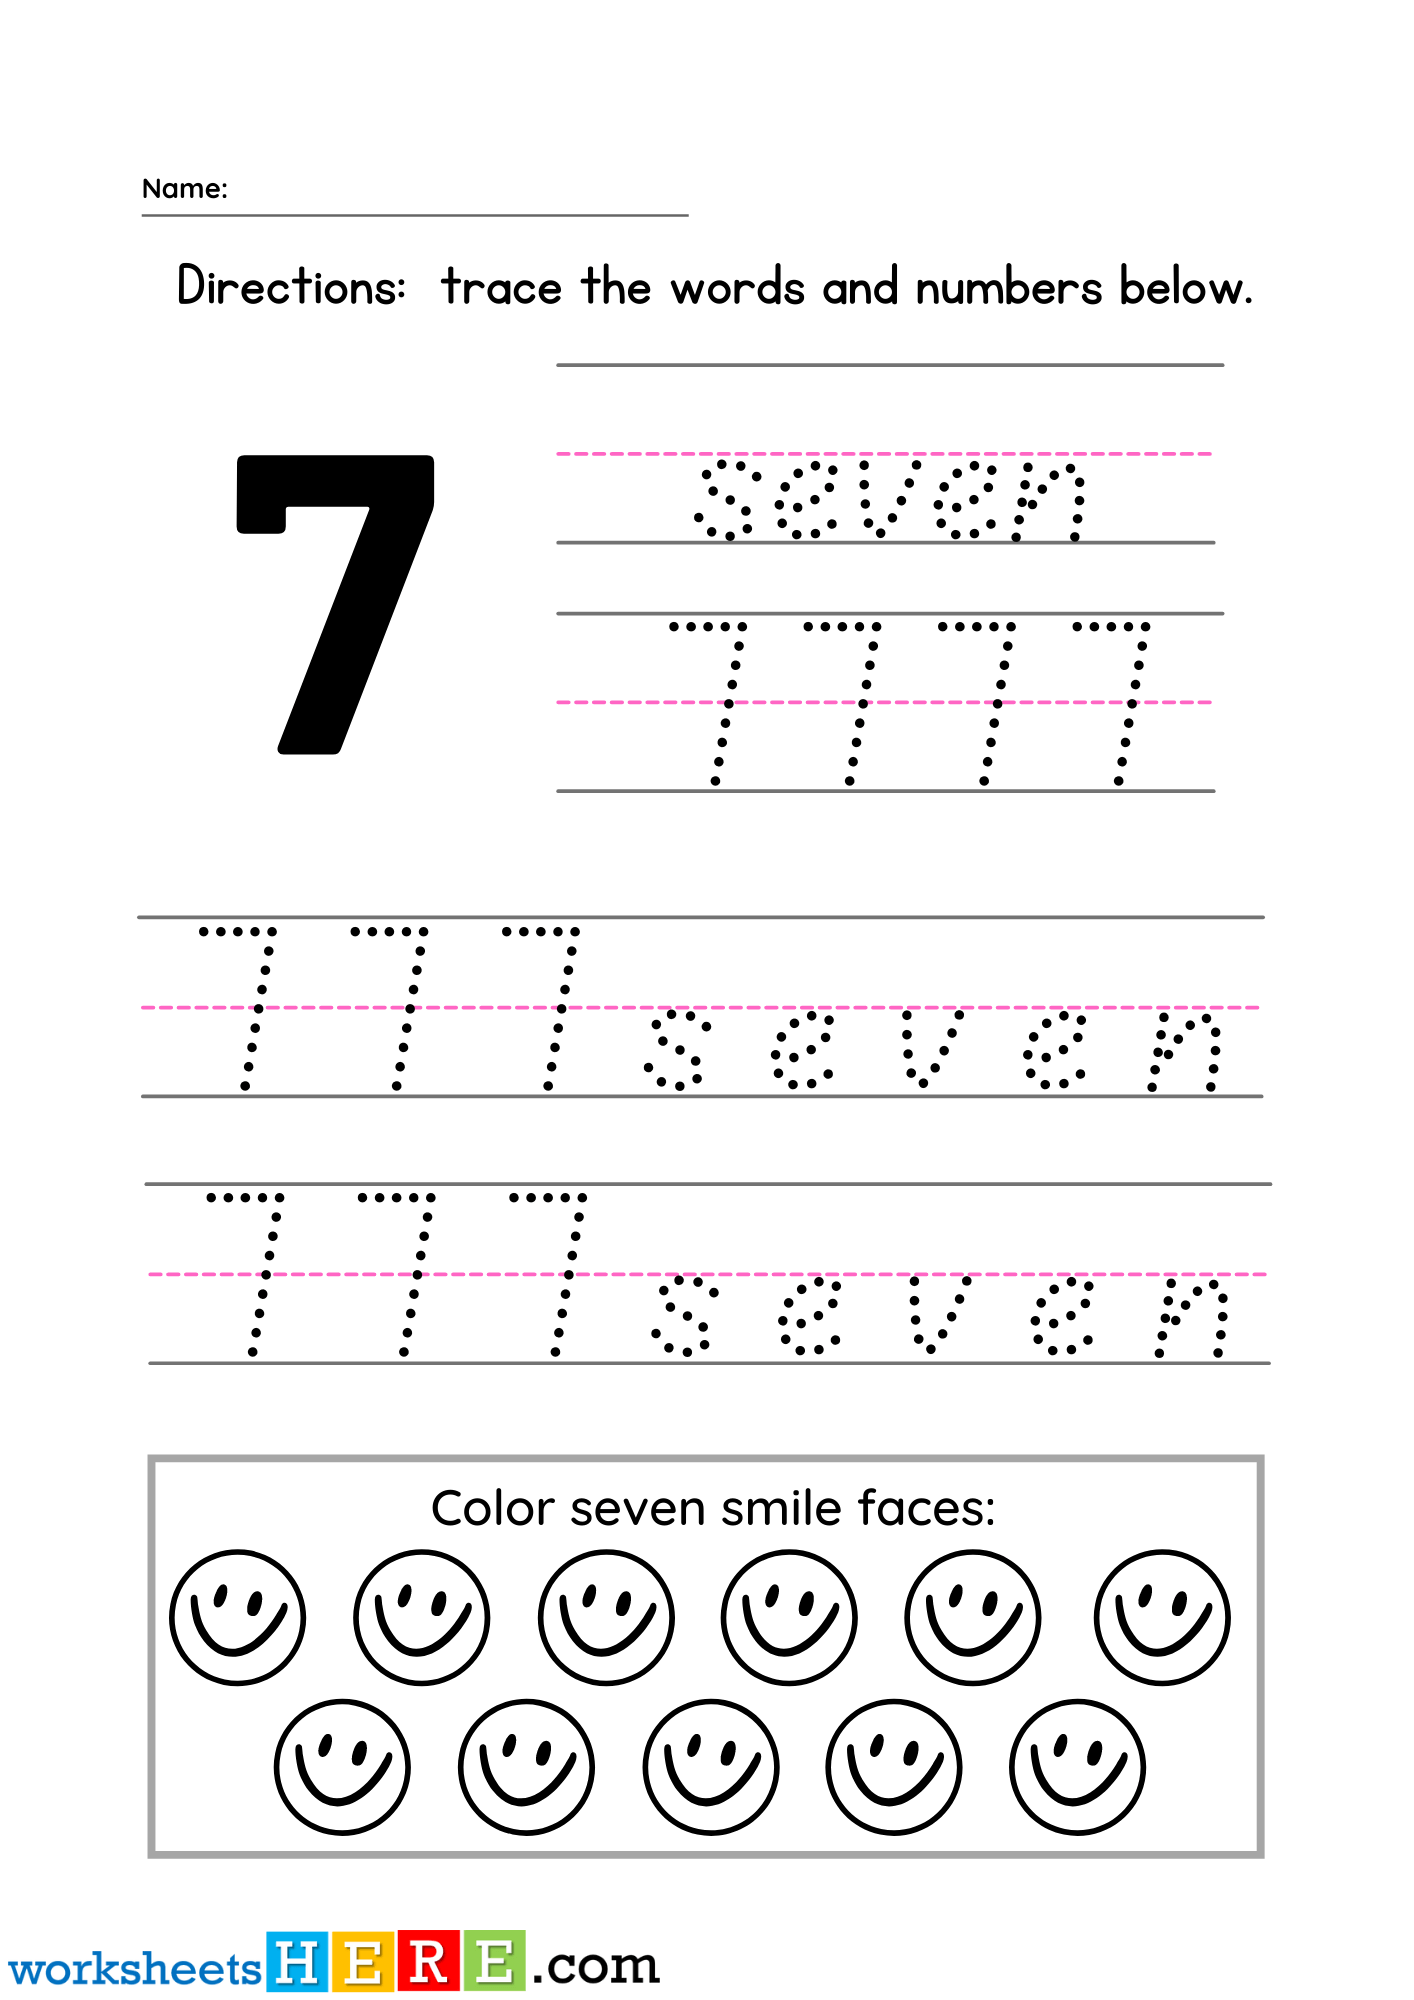 Trace the Number 7 and Word Activity For PDF Worksheet For Kindergarten